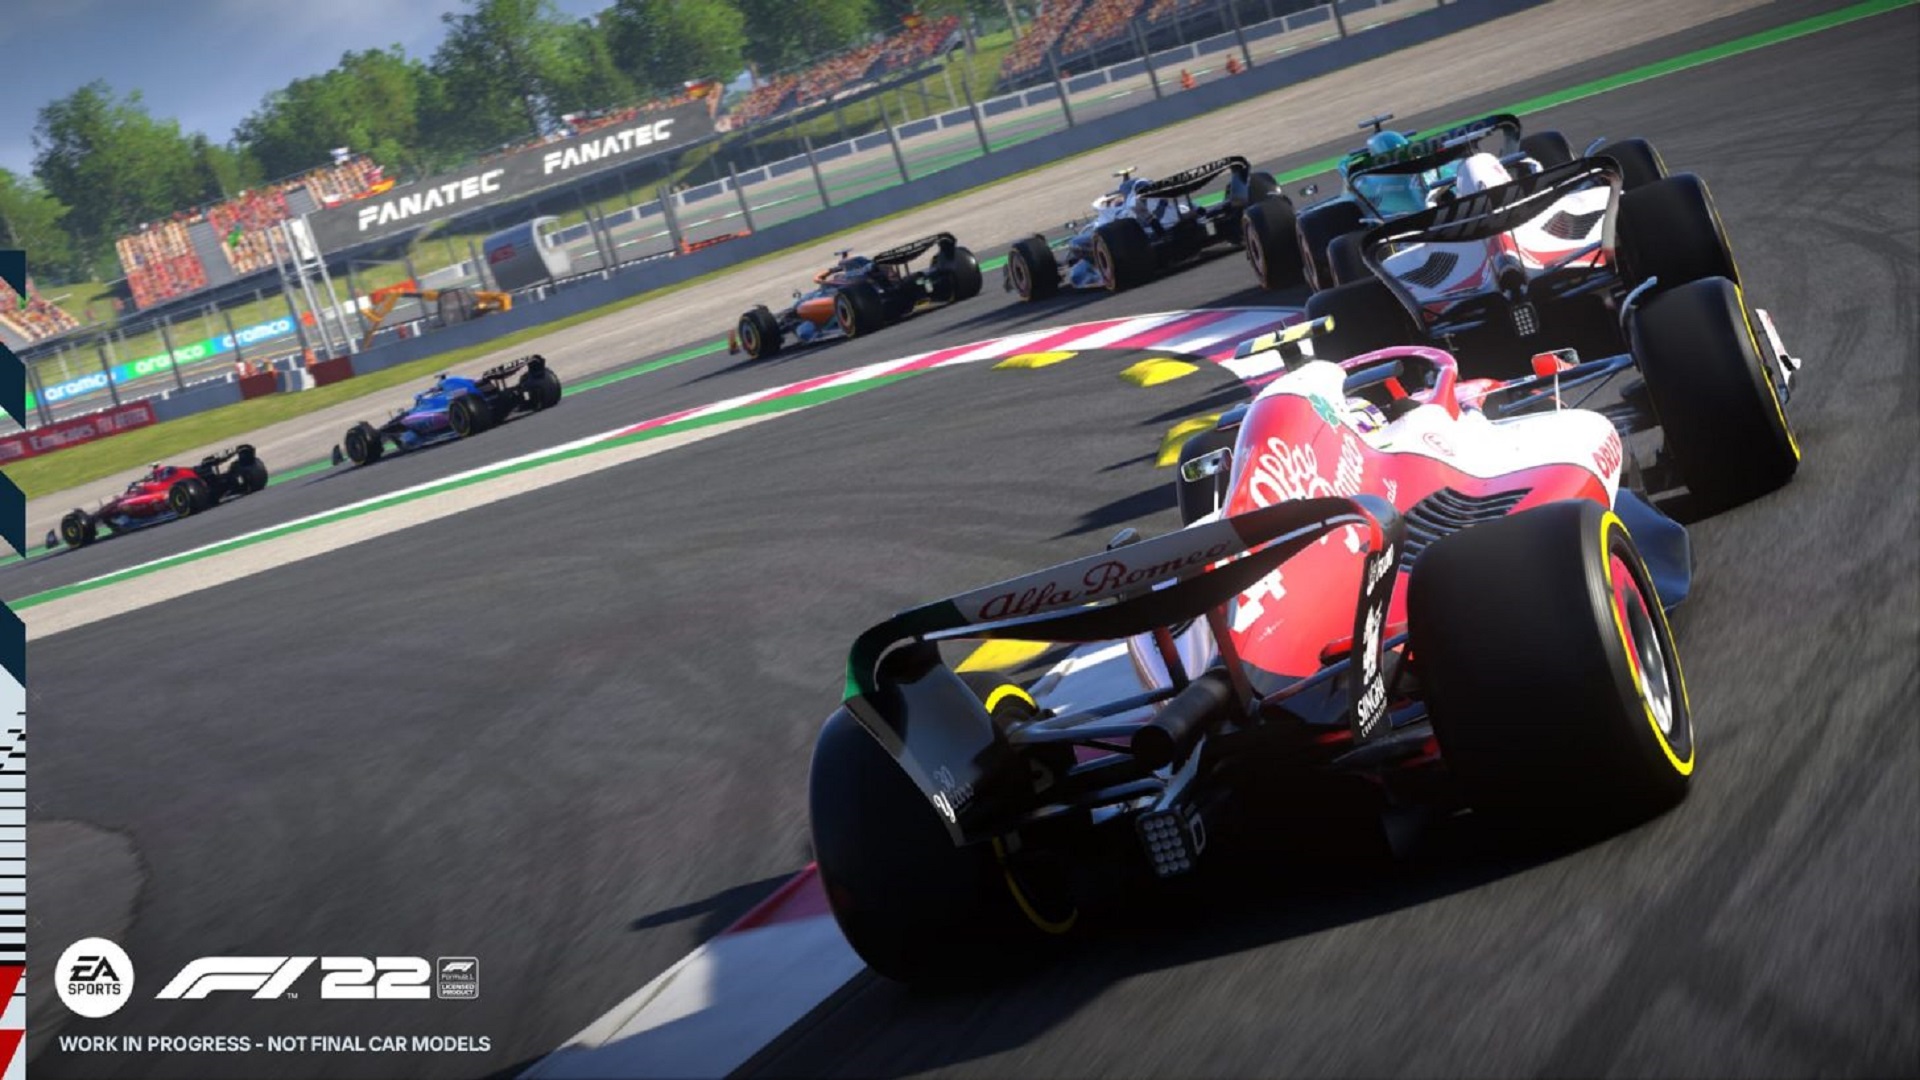 F1 2022 trailer shows the game running in VR - EGM